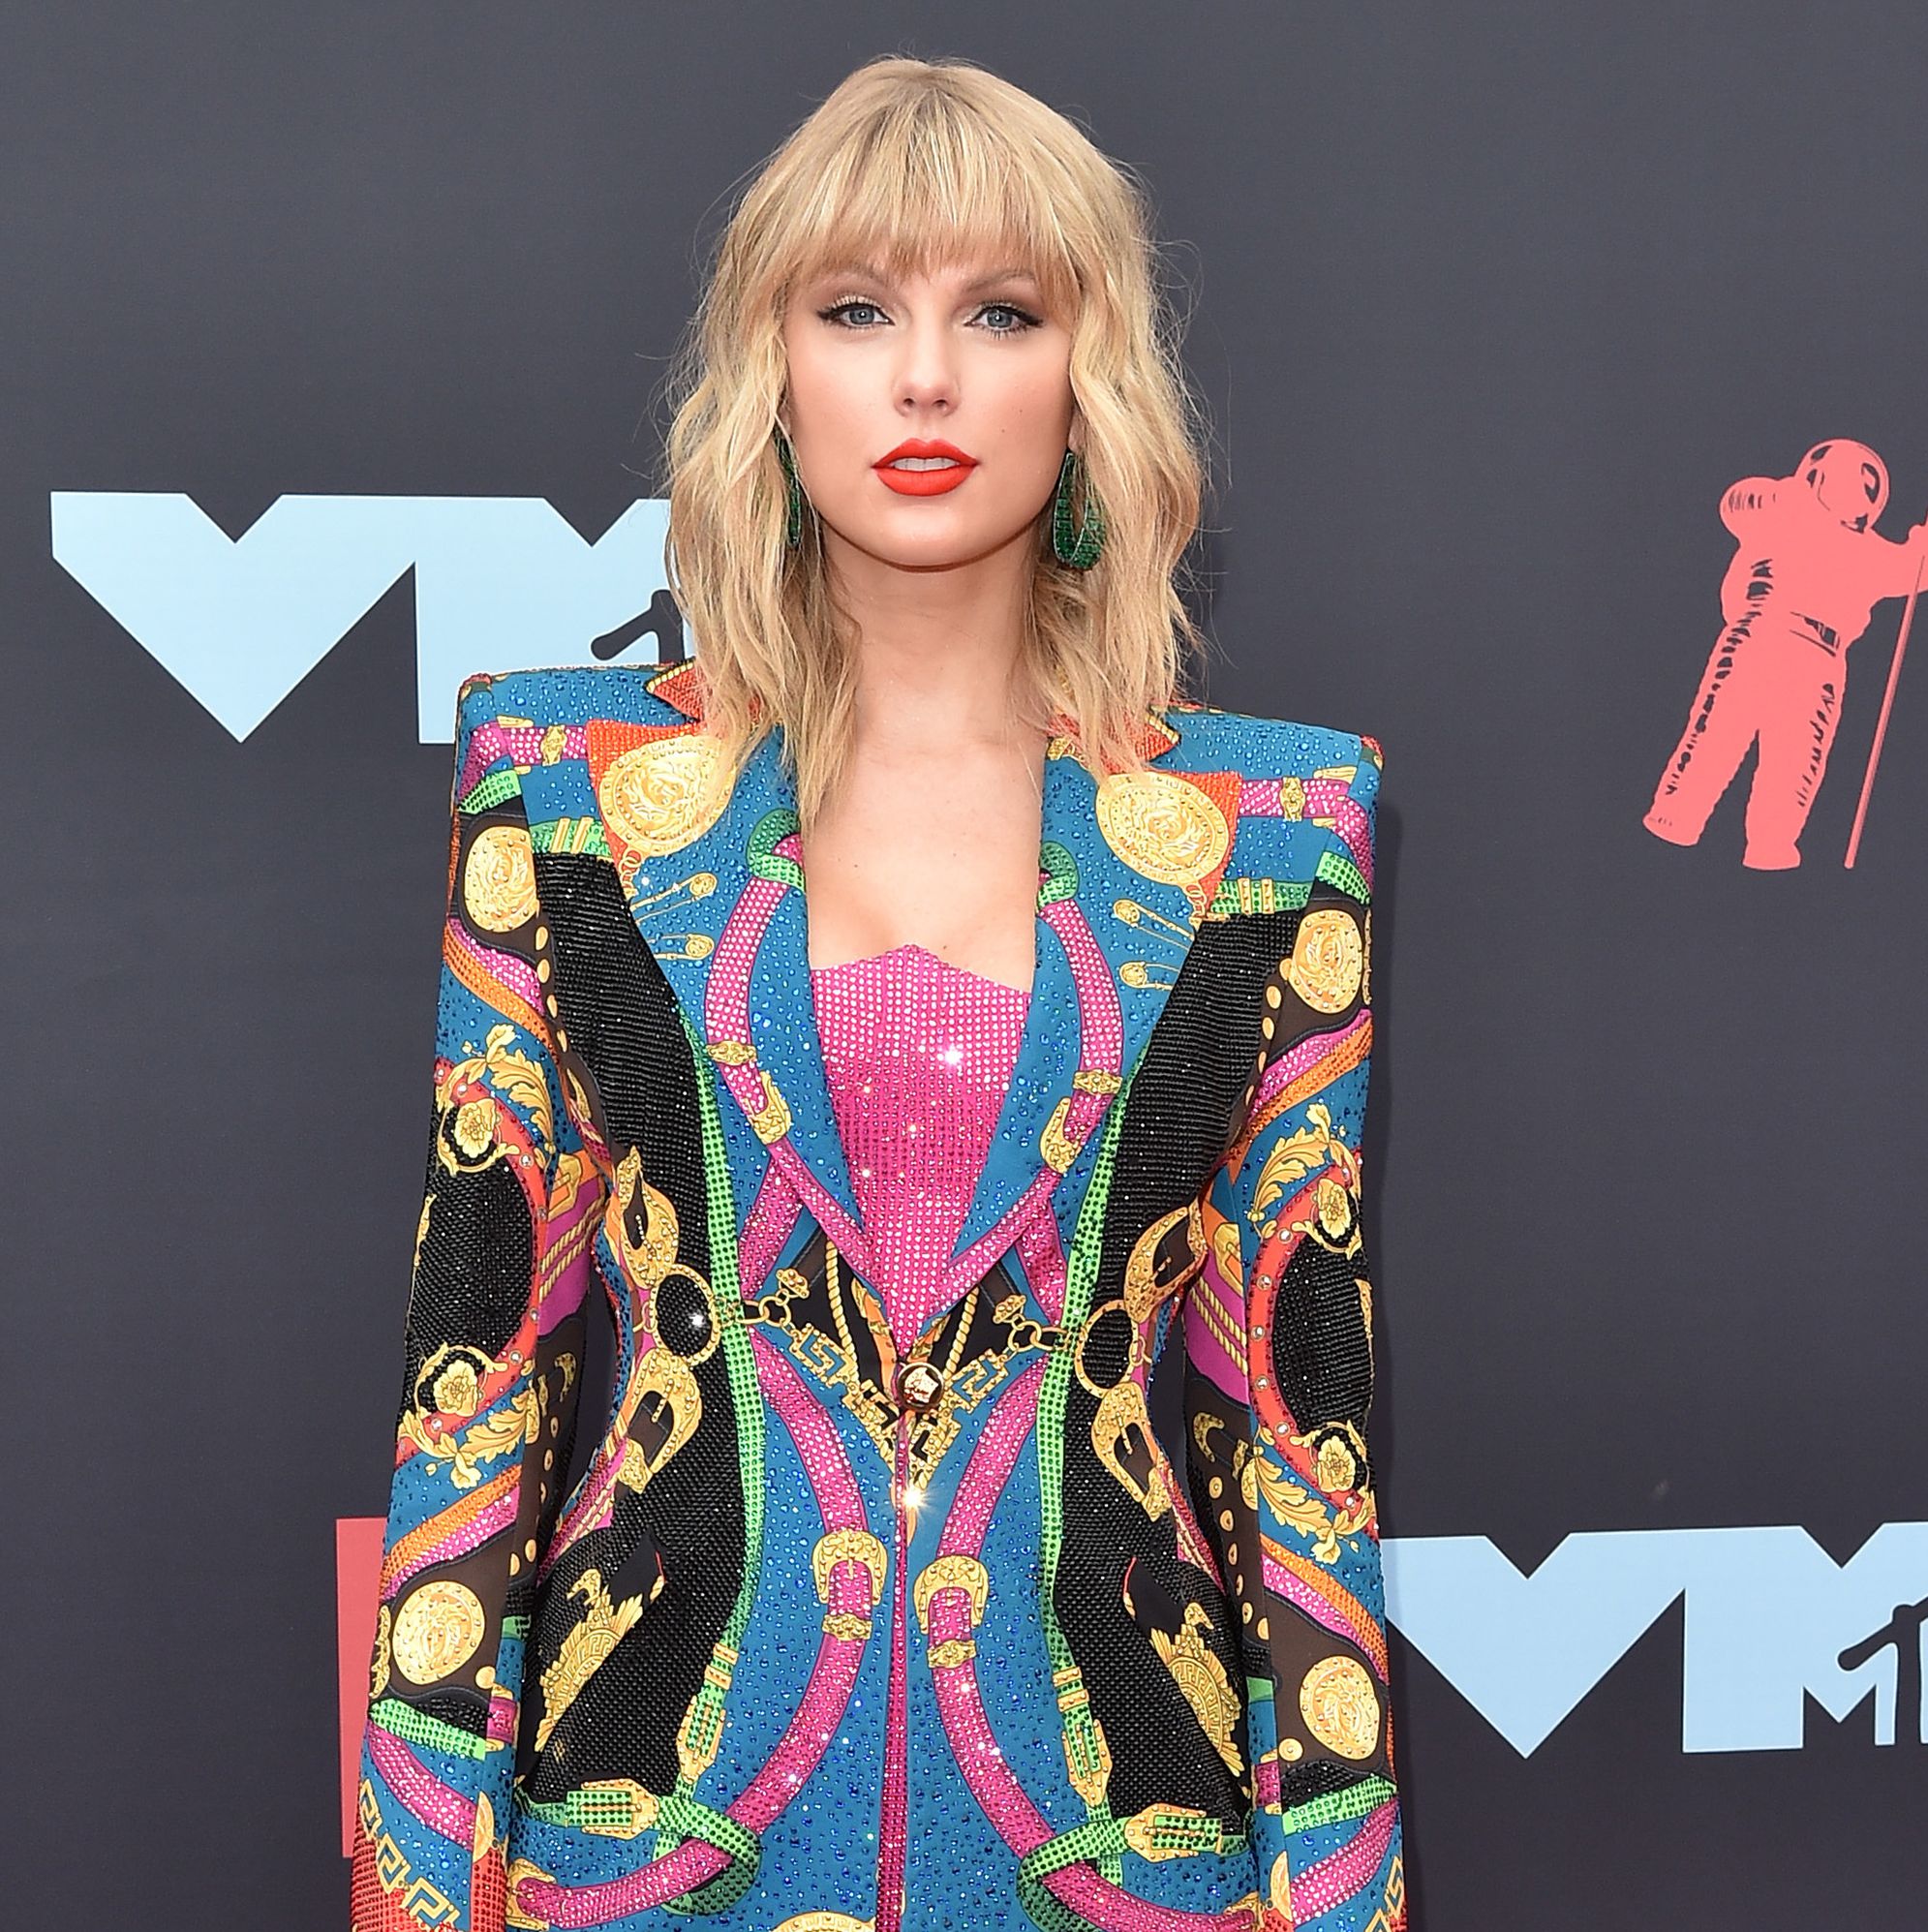 A Man Has Been Arrested After Crashing a Car Into Taylor Swift's NYC Building